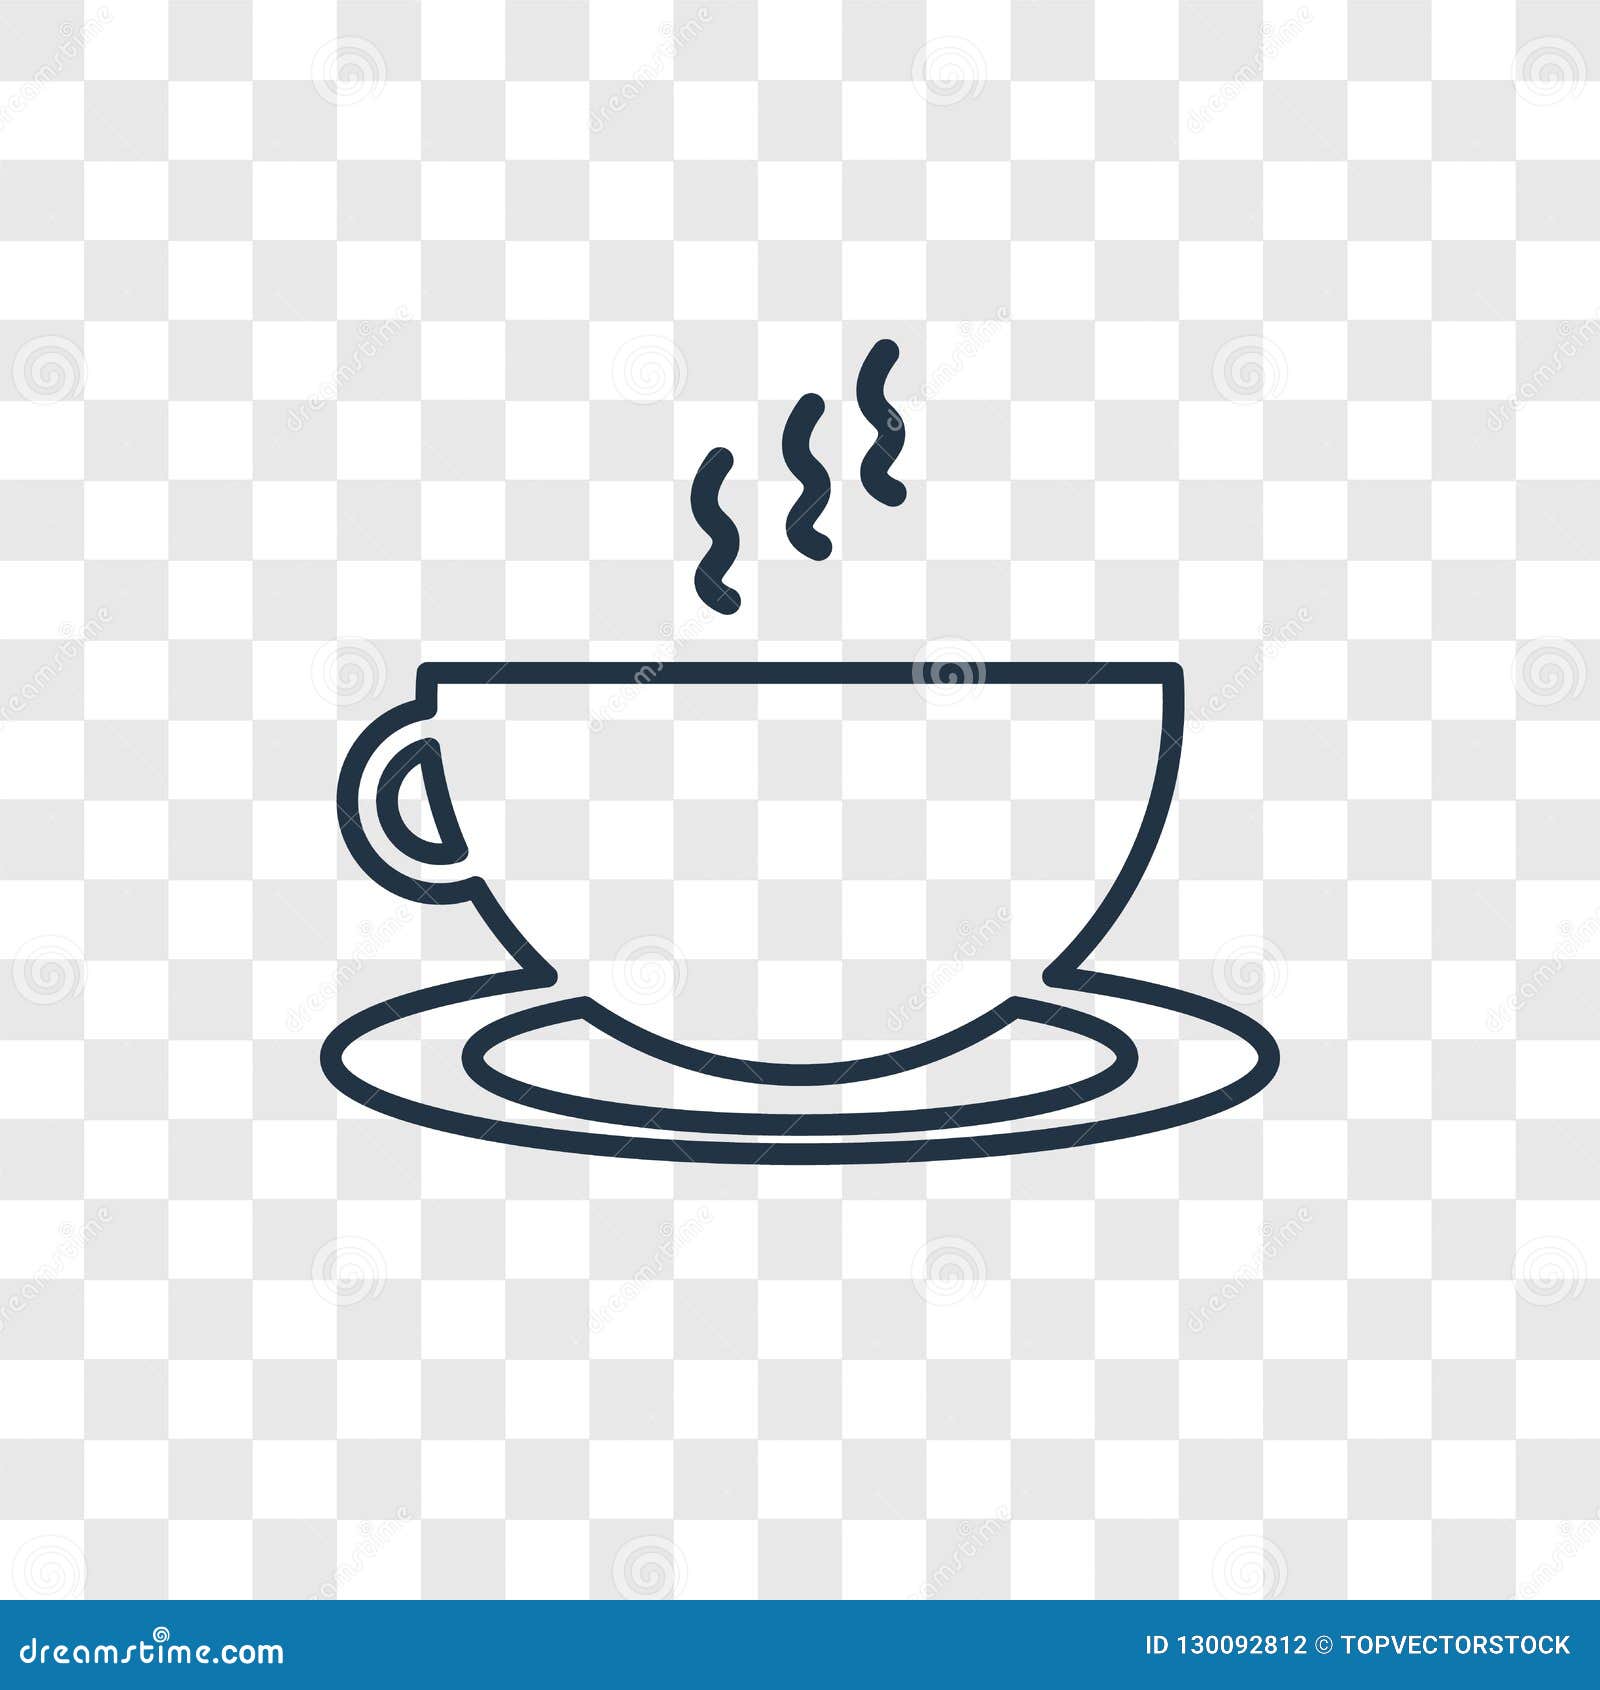 https://thumbs.dreamstime.com/z/hot-drink-concept-vector-linear-icon-isolated-transparent-bac-background-transparency-outline-style-130092812.jpg